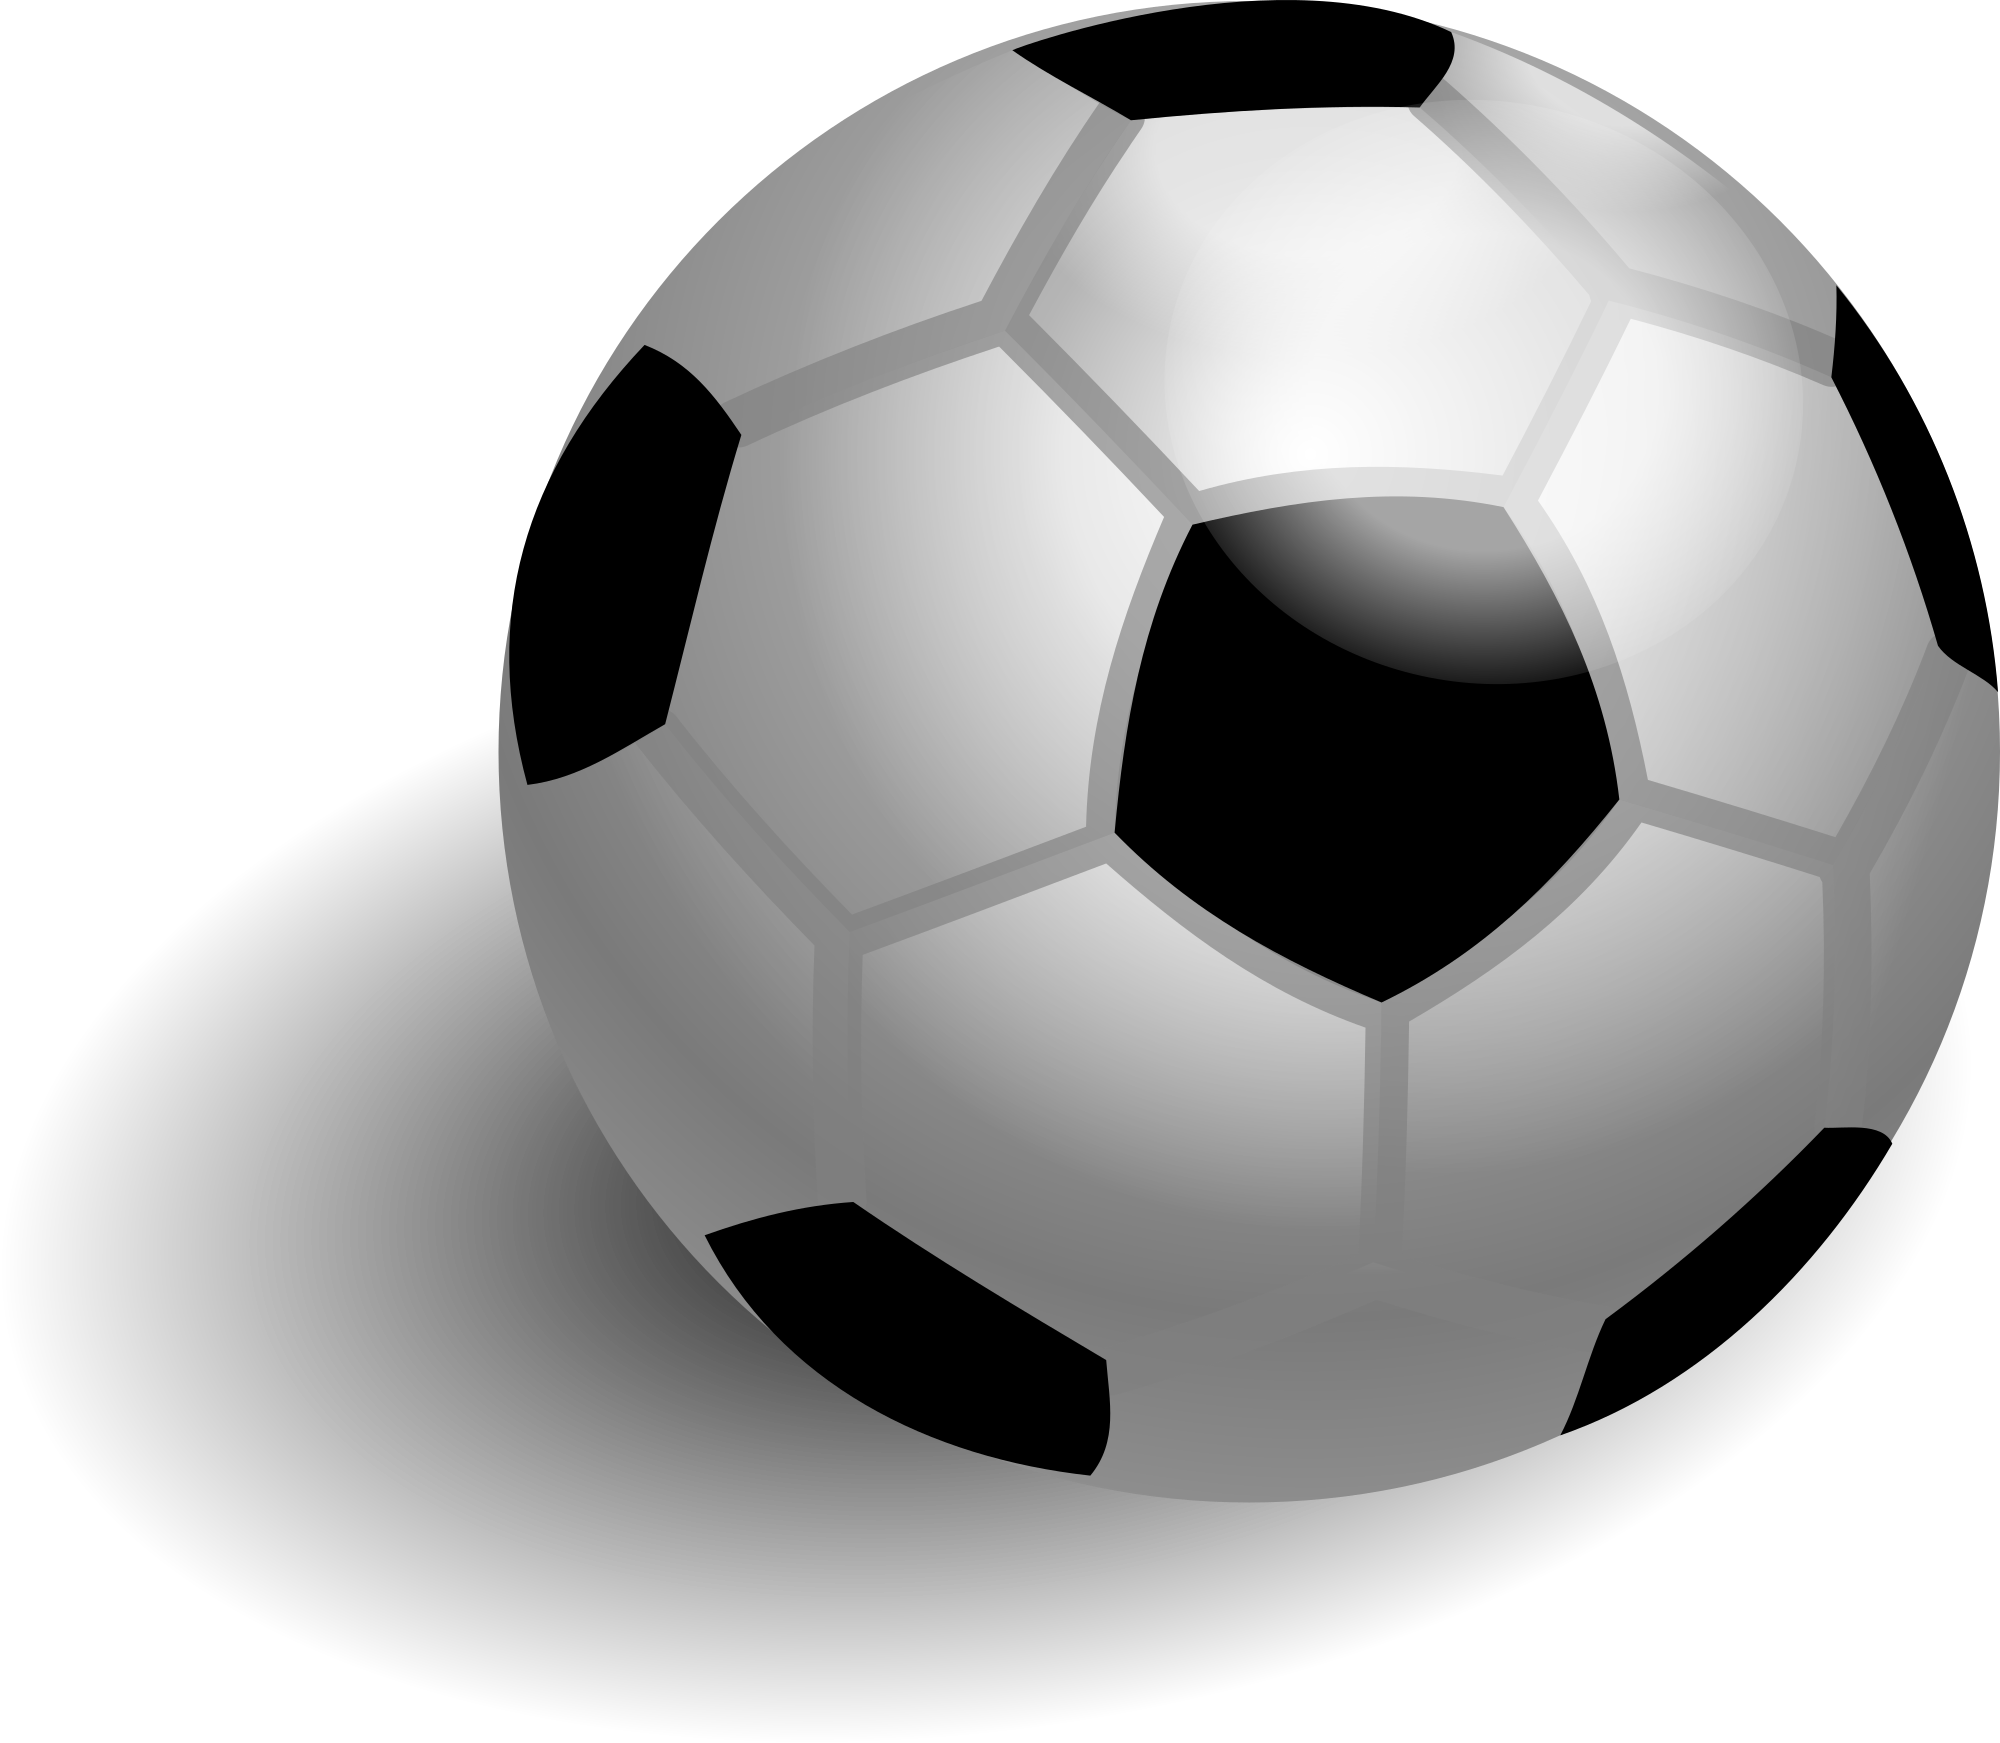 Free soccer ball with shadow clipart clipart and vector image